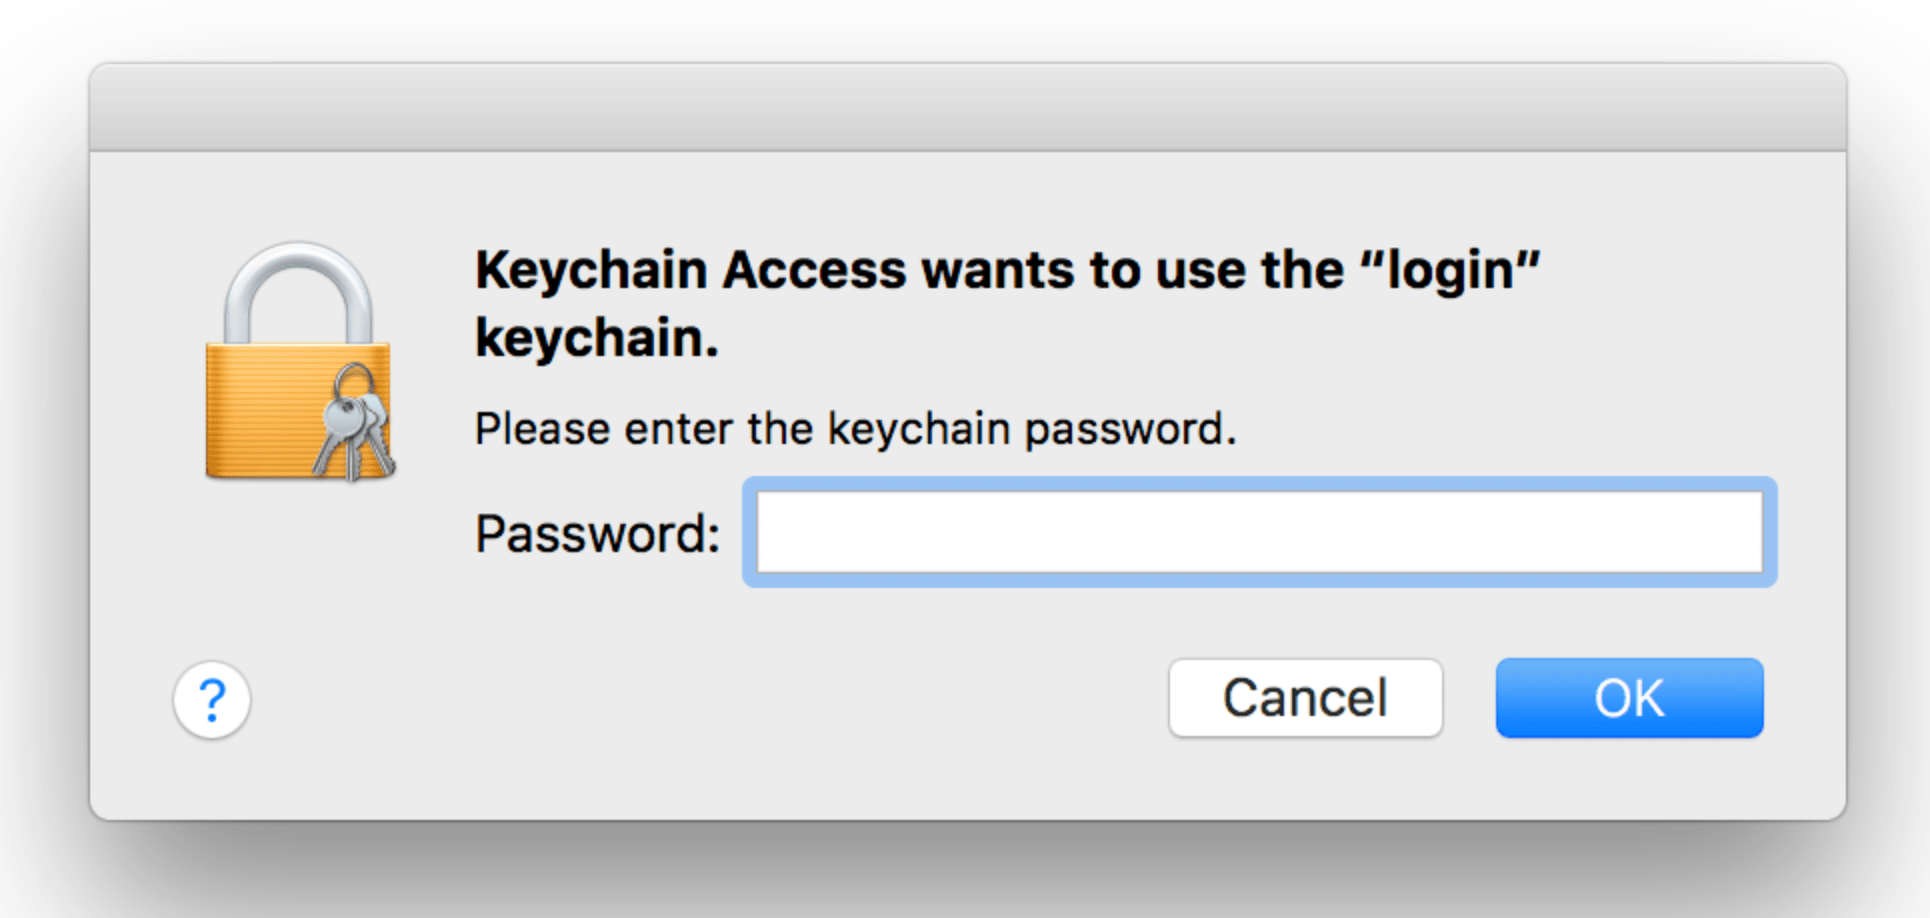 keychain access wants house the login keychain message